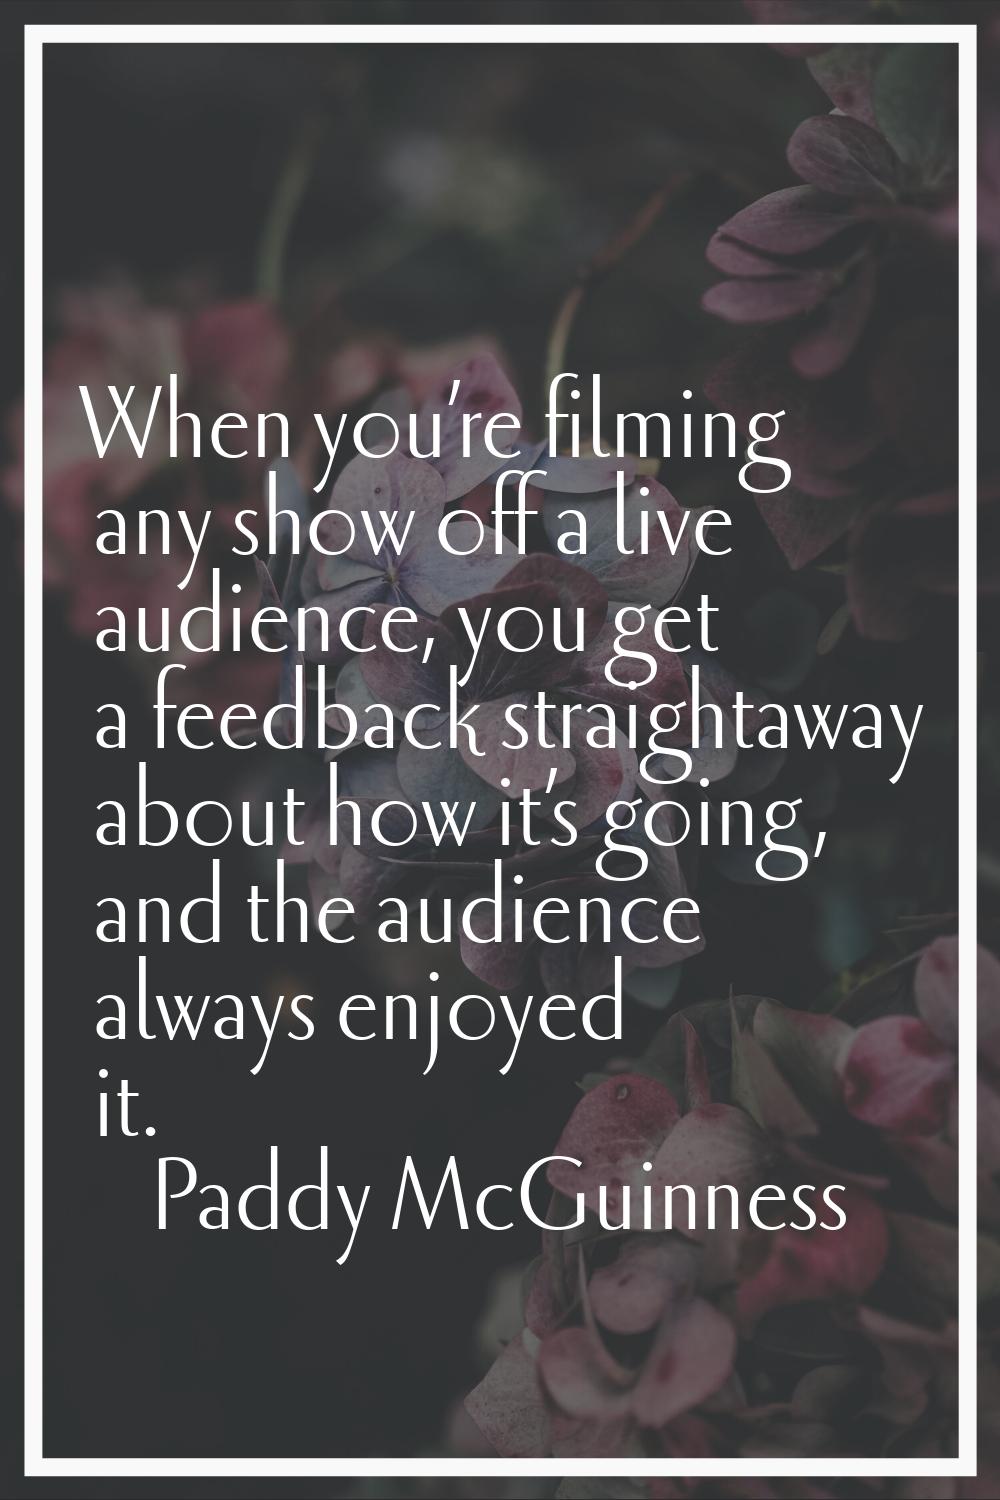 When you’re filming any show off a live audience, you get a feedback straightaway about how it’s go